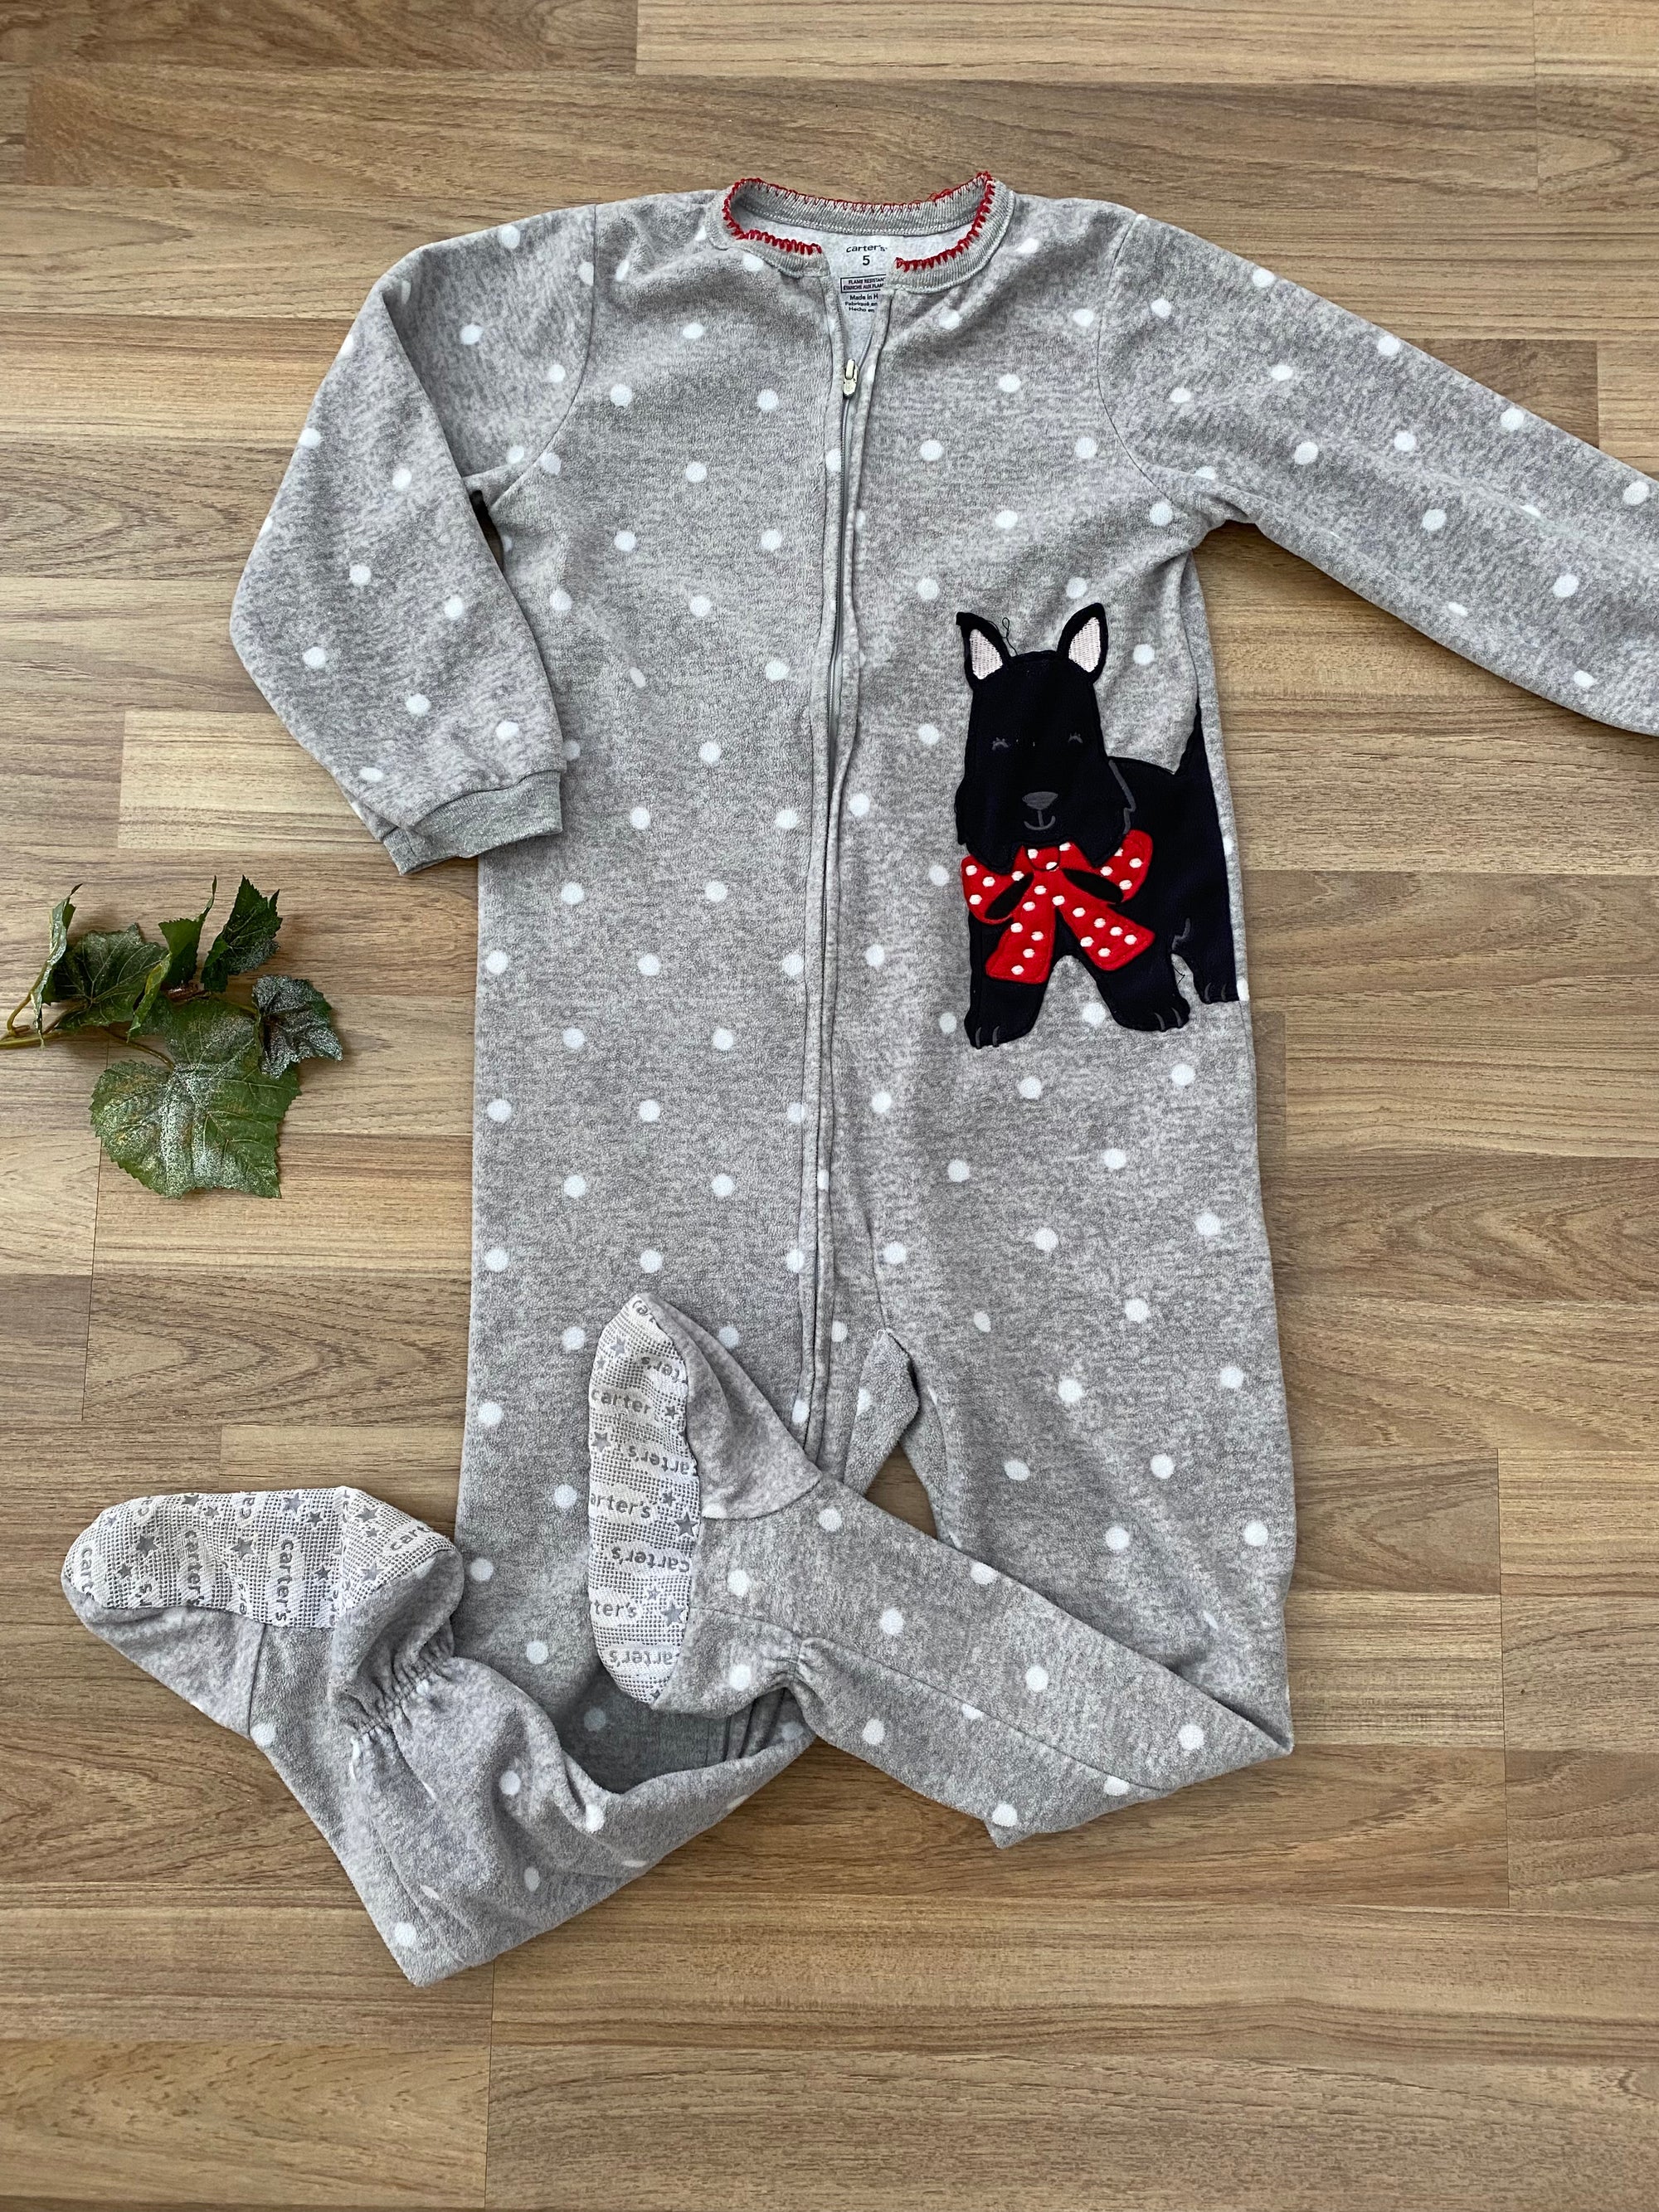 Full Zip Footed PJ's (Girls Size 5)